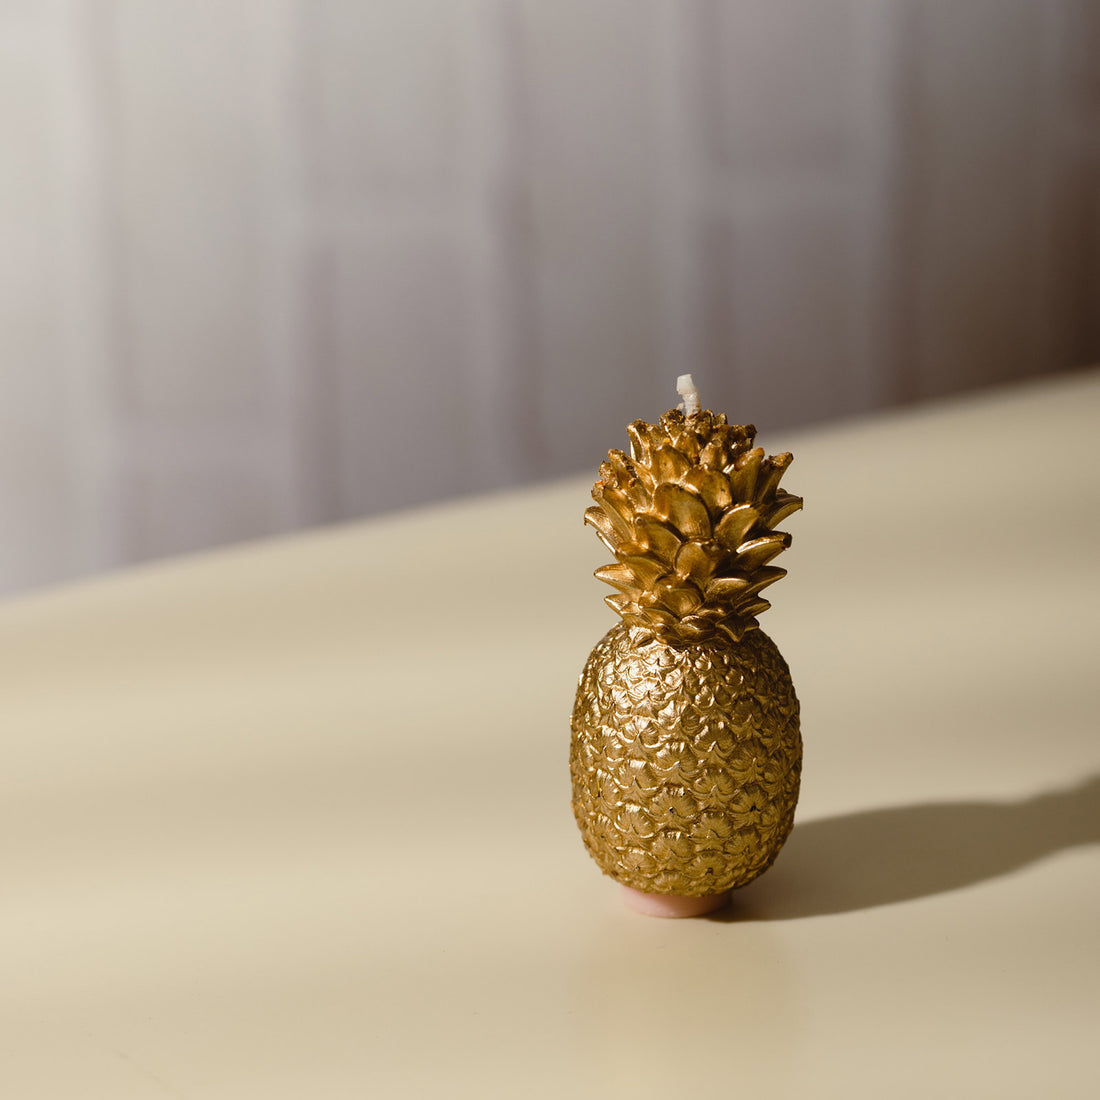 Golden Pineapple Candle that will never disappoint you.